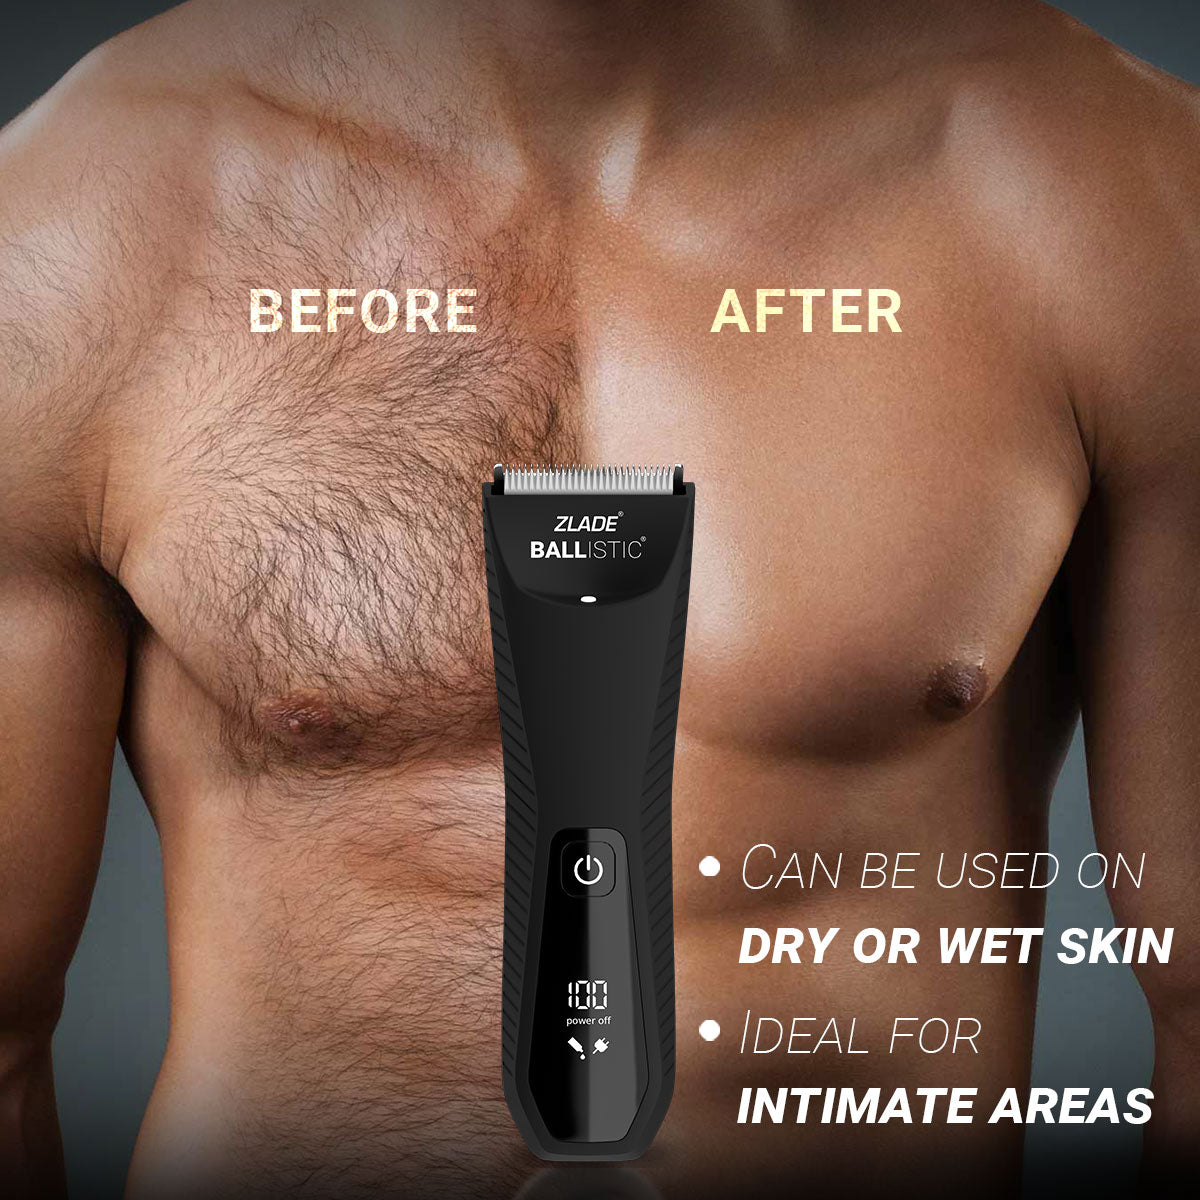 Zlade Ballistic TURBO 3.0 Manscaping Full-Body Trimmer with Extra Head | Beard, Body, Pubic Hair | 1 Trimmer + 1 Head